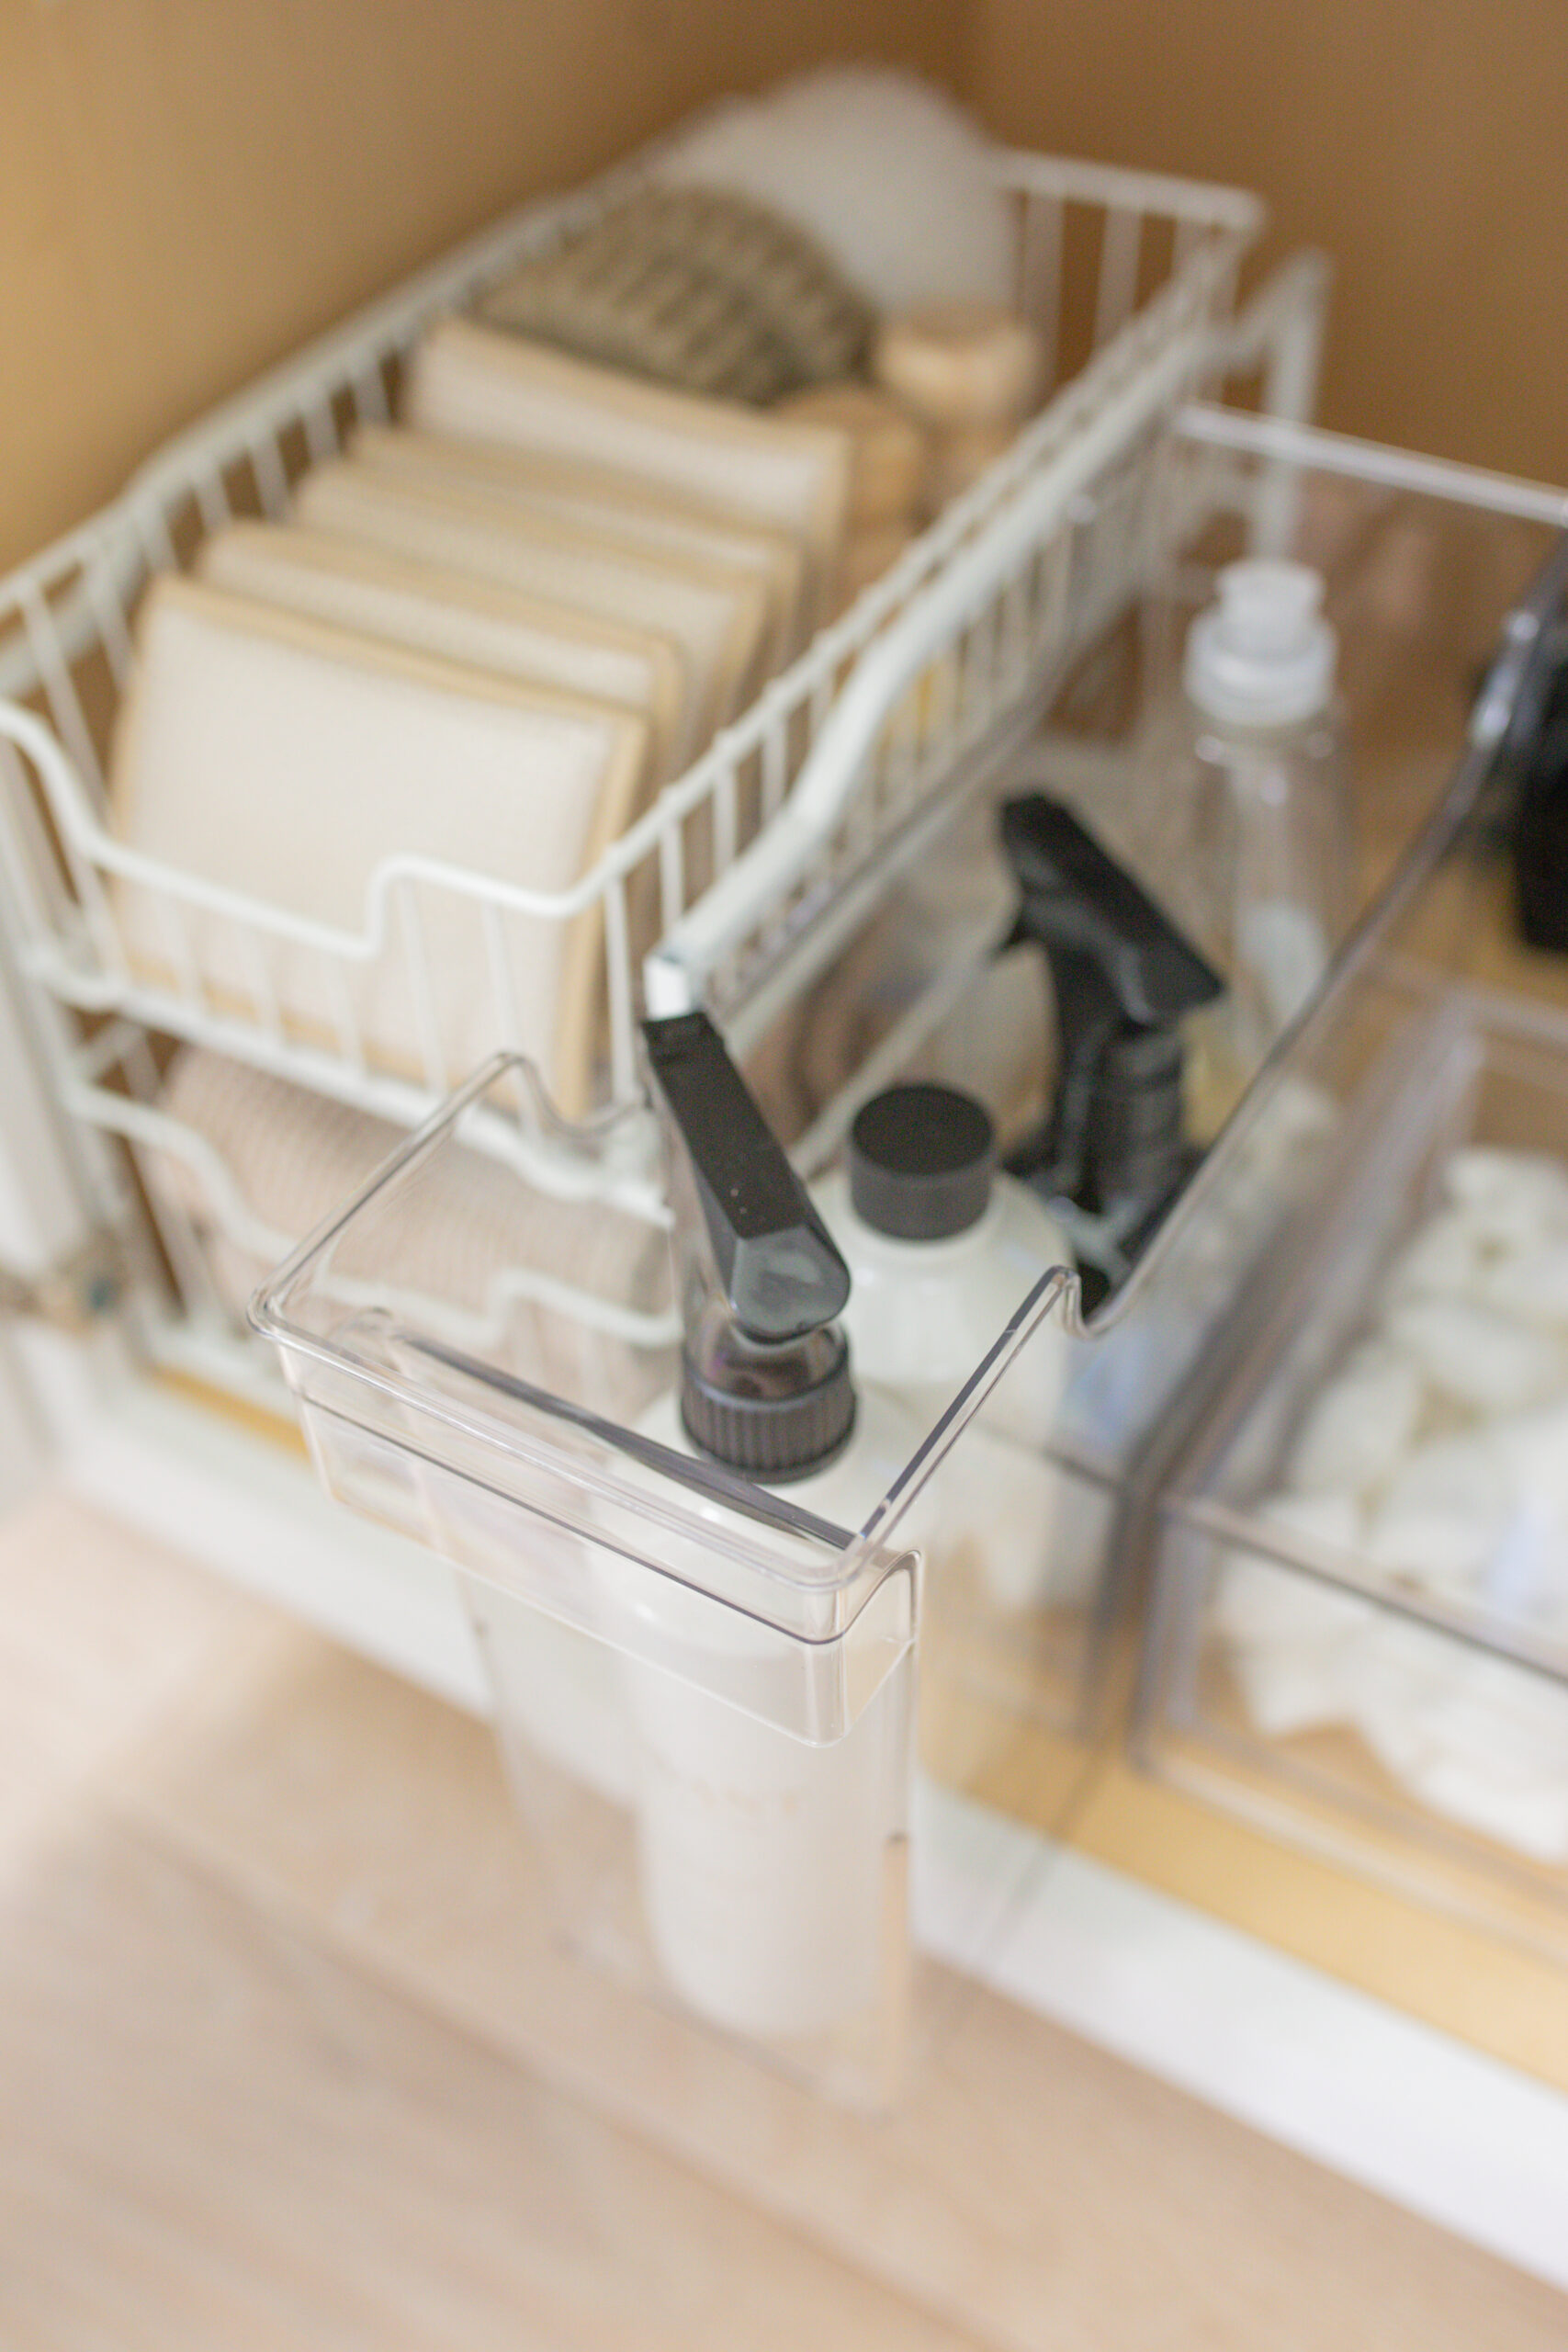 Roll-out bins for under your kitchen sink